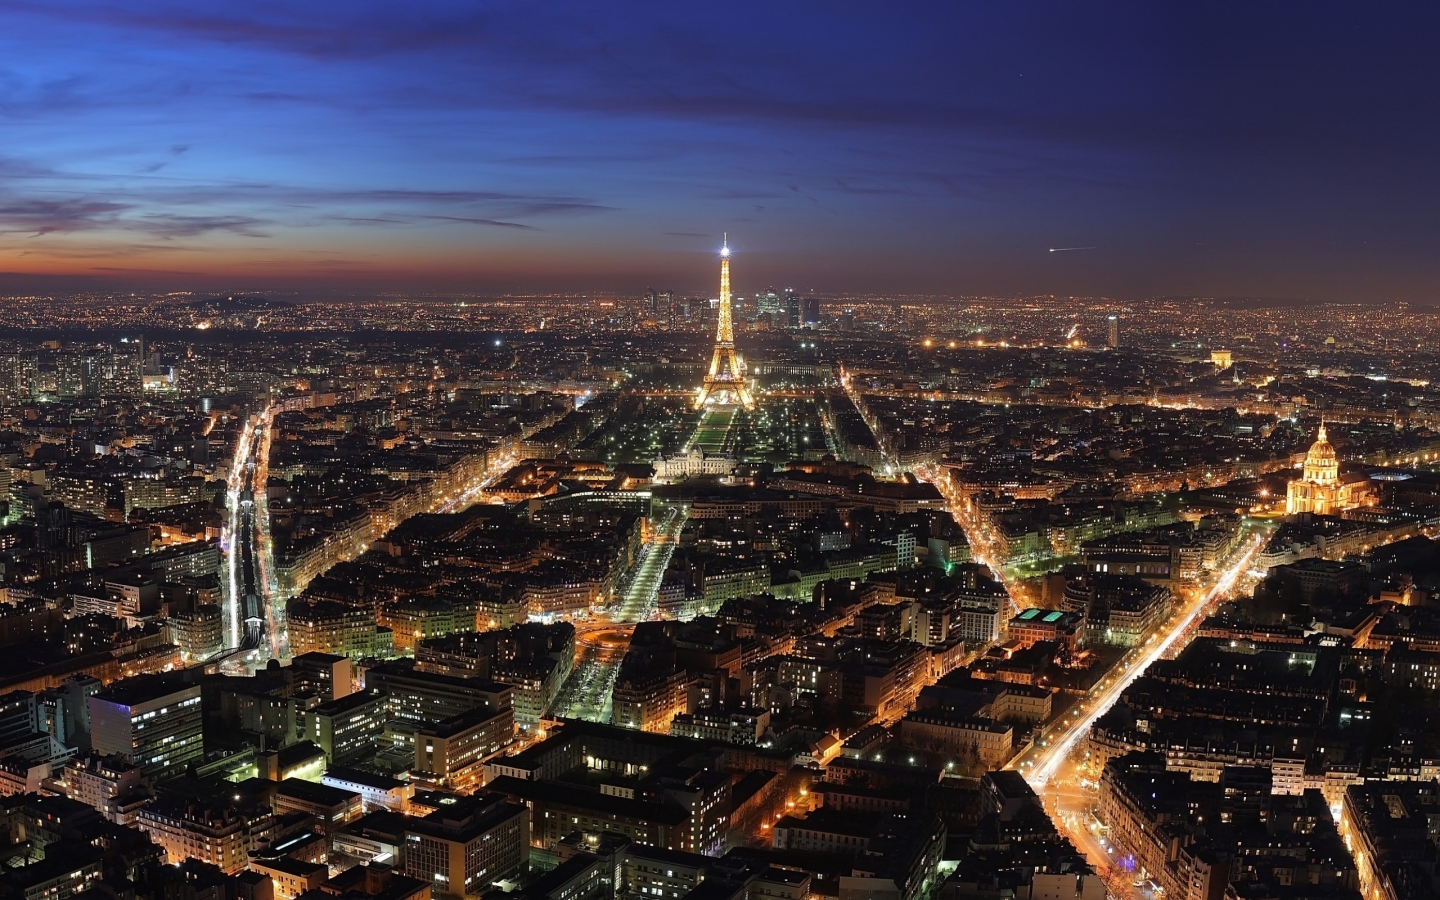 Paris seen at night for 1440 x 900 widescreen resolution